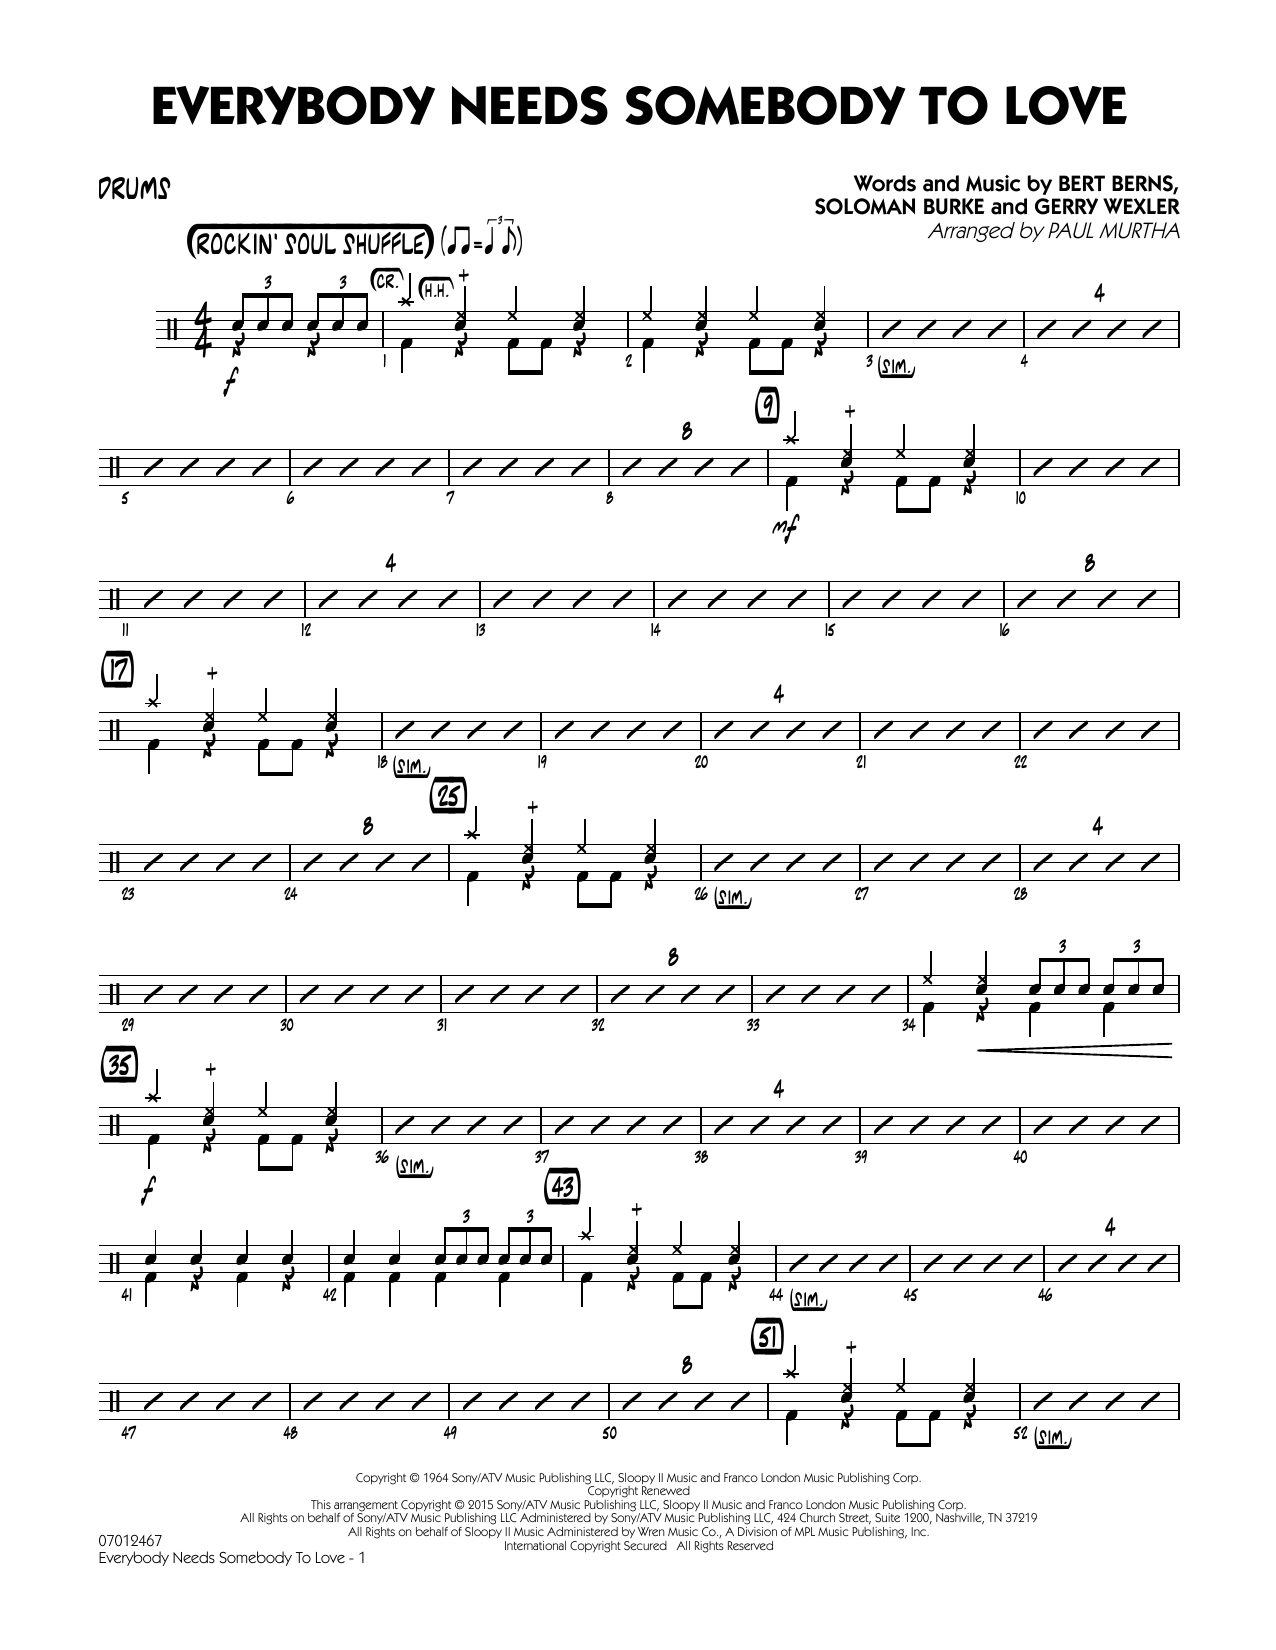 Paul Murtha Everybody Needs Somebody to Love - Drums sheet music notes and chords. Download Printable PDF.